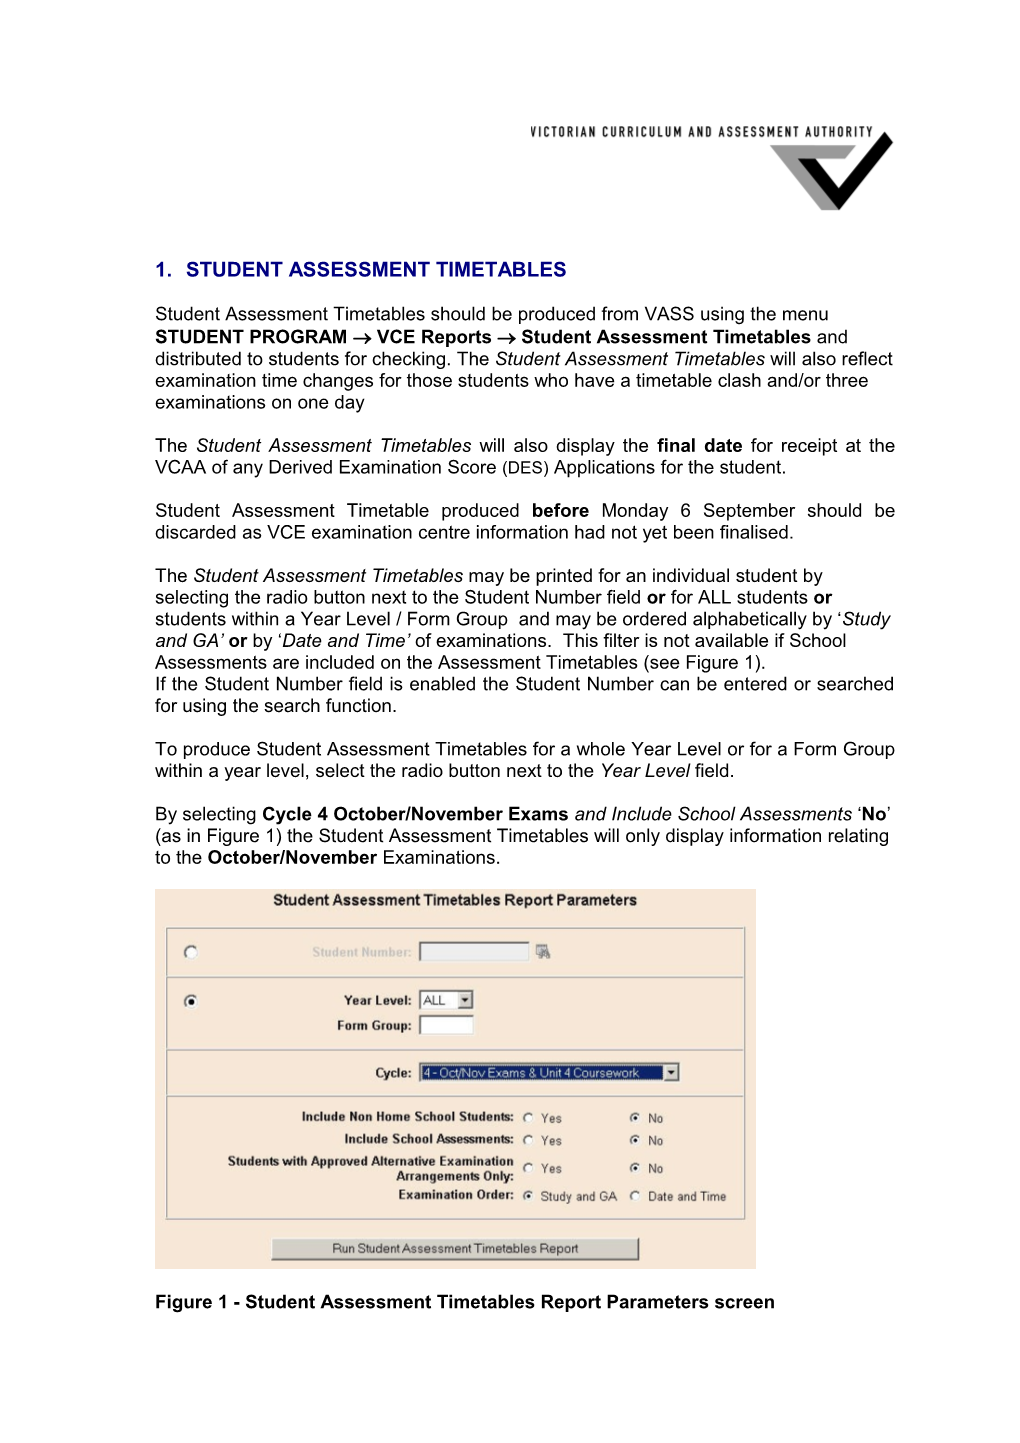 Student Assessment Timetables Should Be Produced from VASS Using the Menu STUDENT PROGRAM